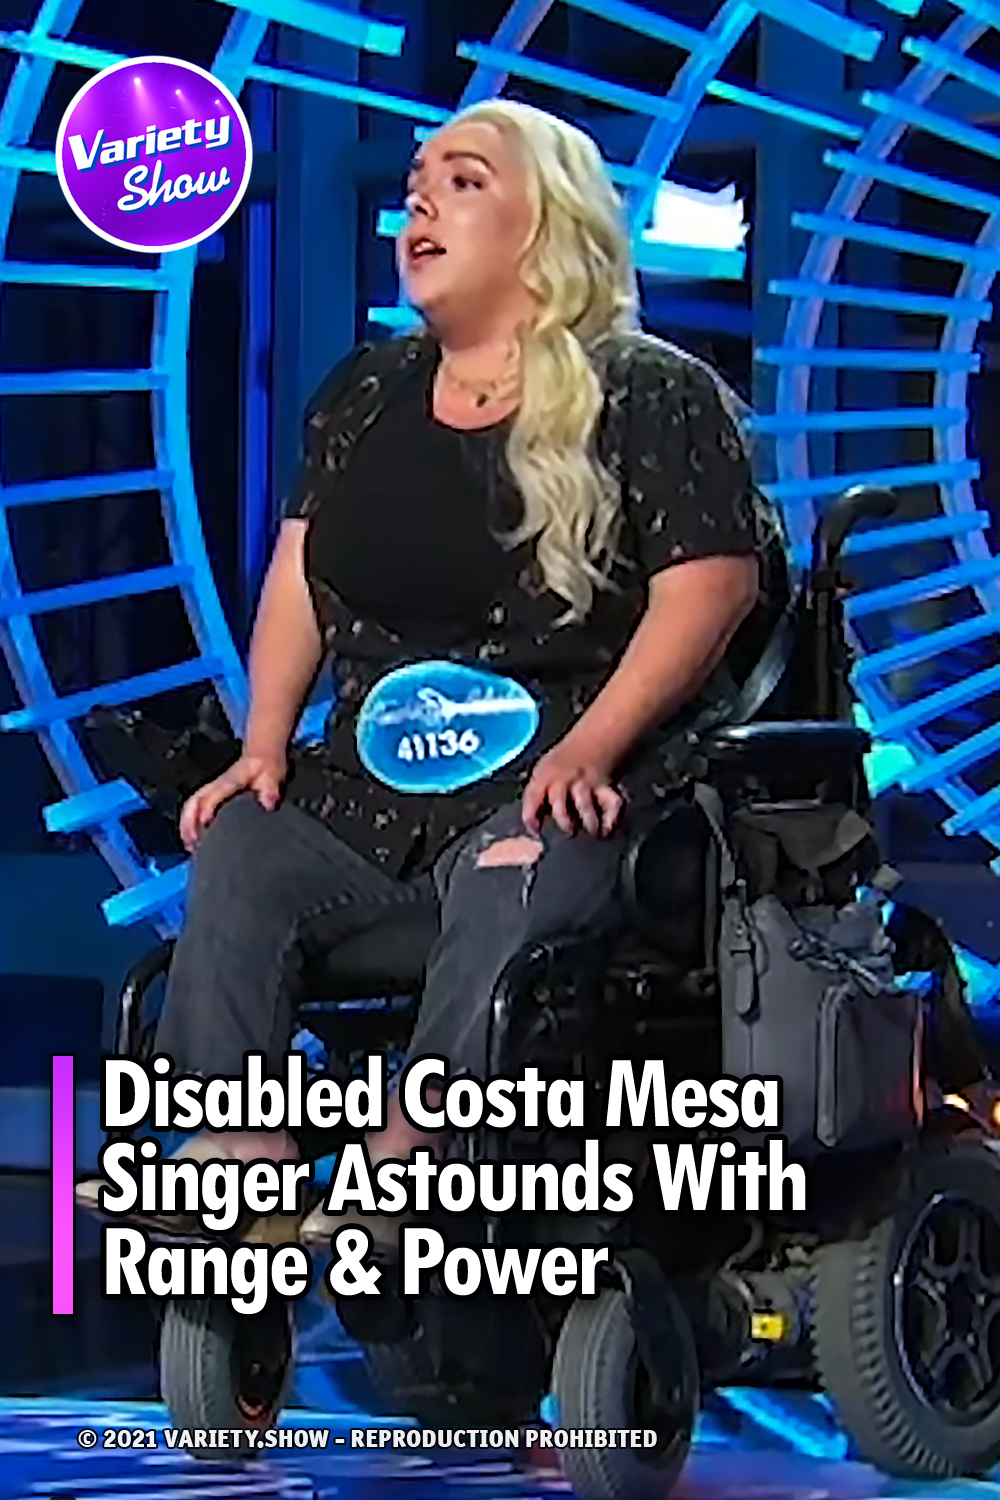 Disabled Costa Mesa Singer Astounds With Range & Power